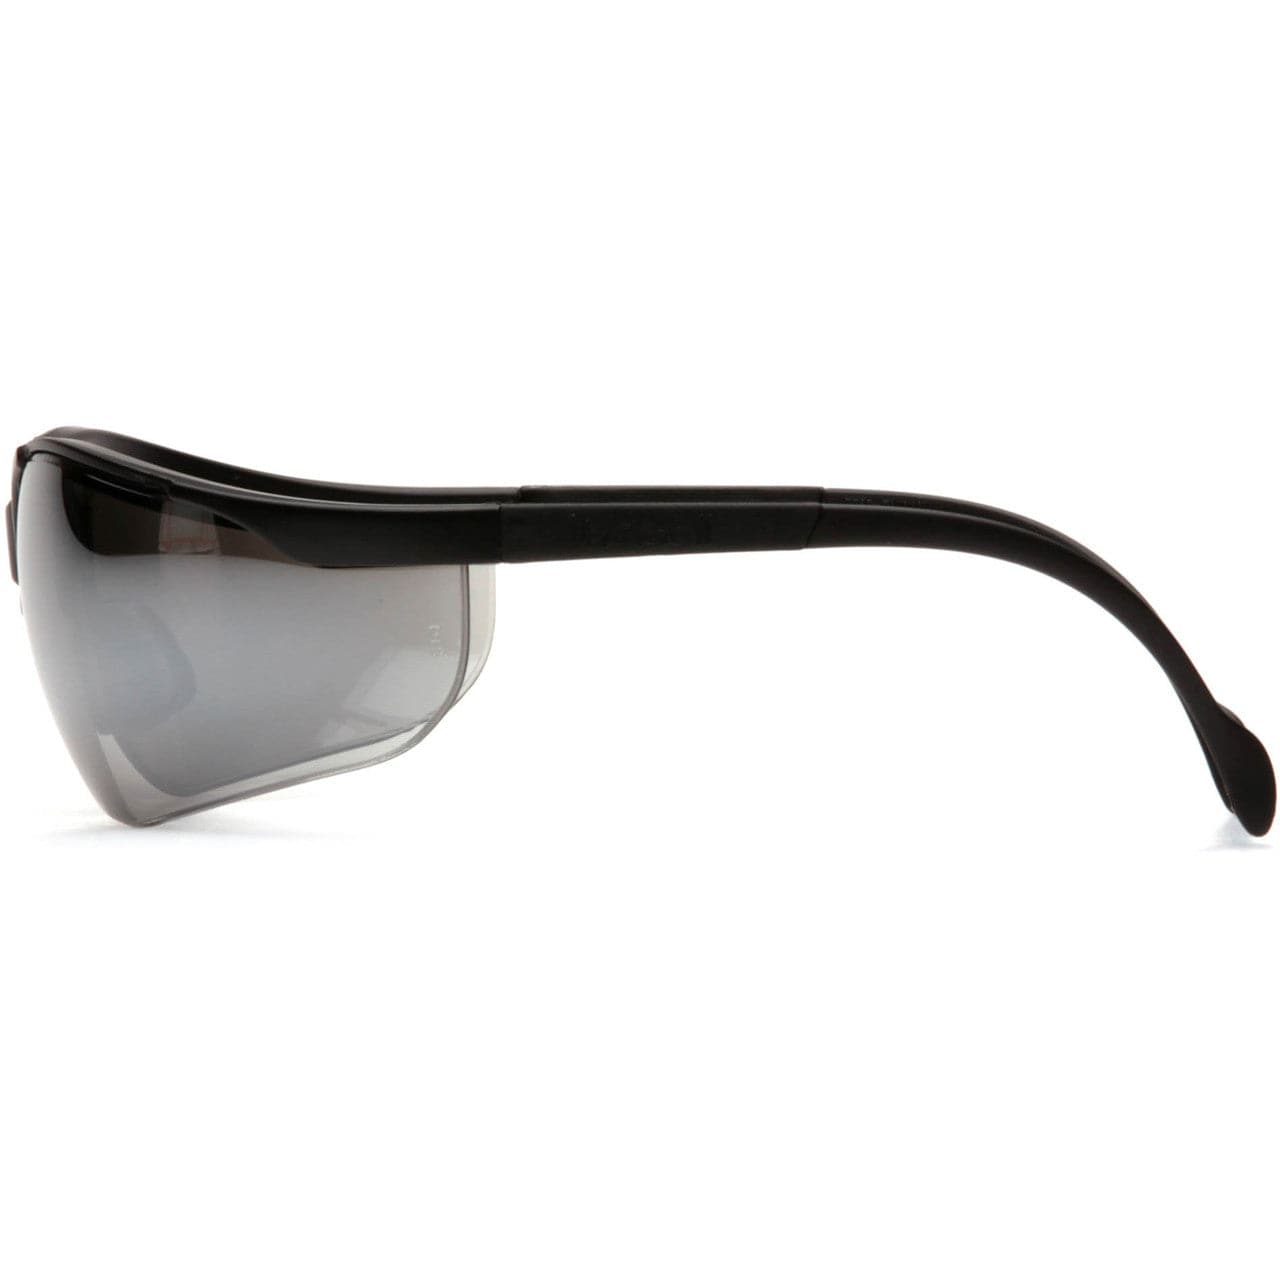 Pyramex Venture 2 Safety Glasses with Black Frame and Silver Mirror Lens SB1870S Side View